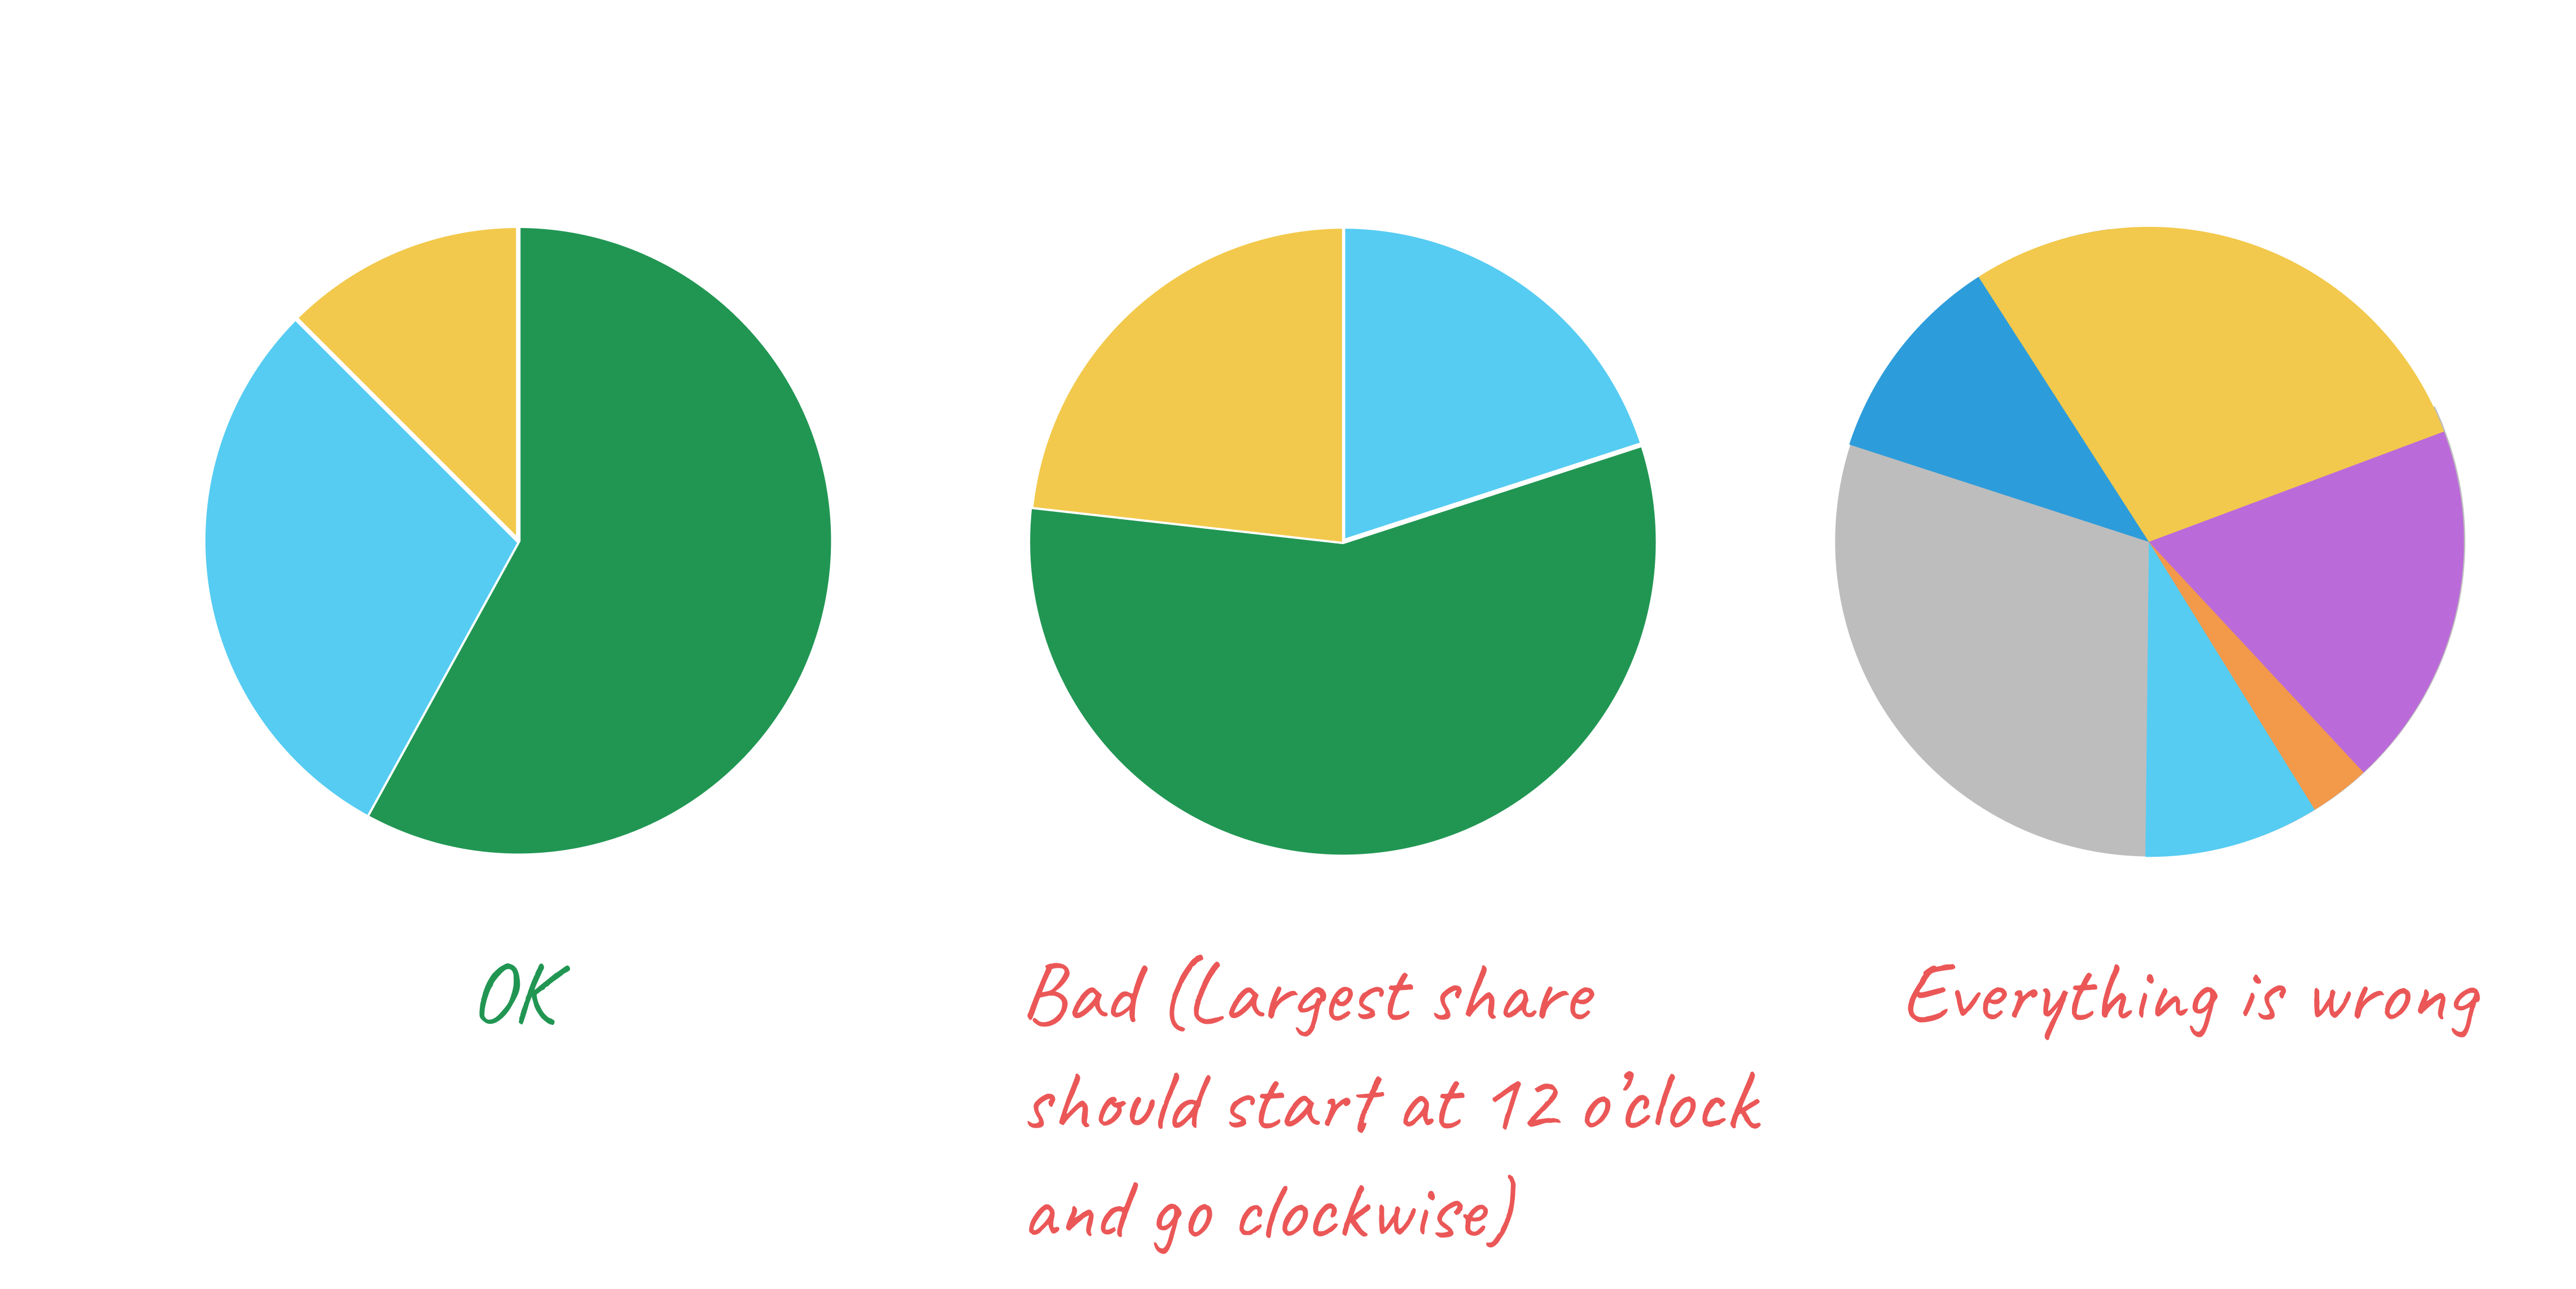 Sort slices in pie charts from largest to smallest, and start at 12 o’clock.